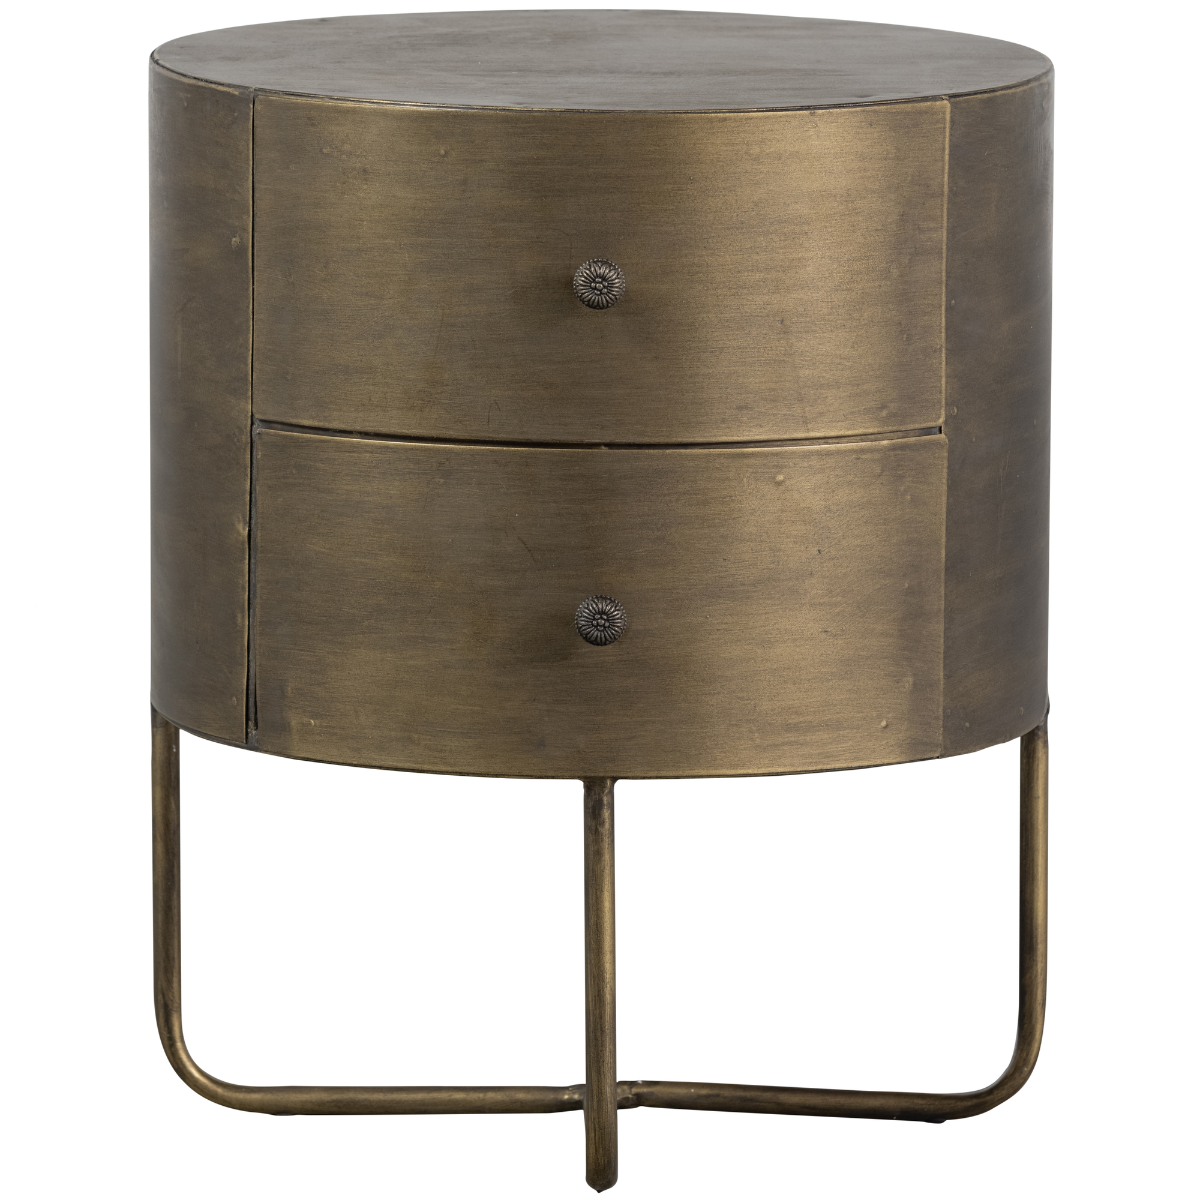 Glossy Antique Brass Metal Round Small Cabinet